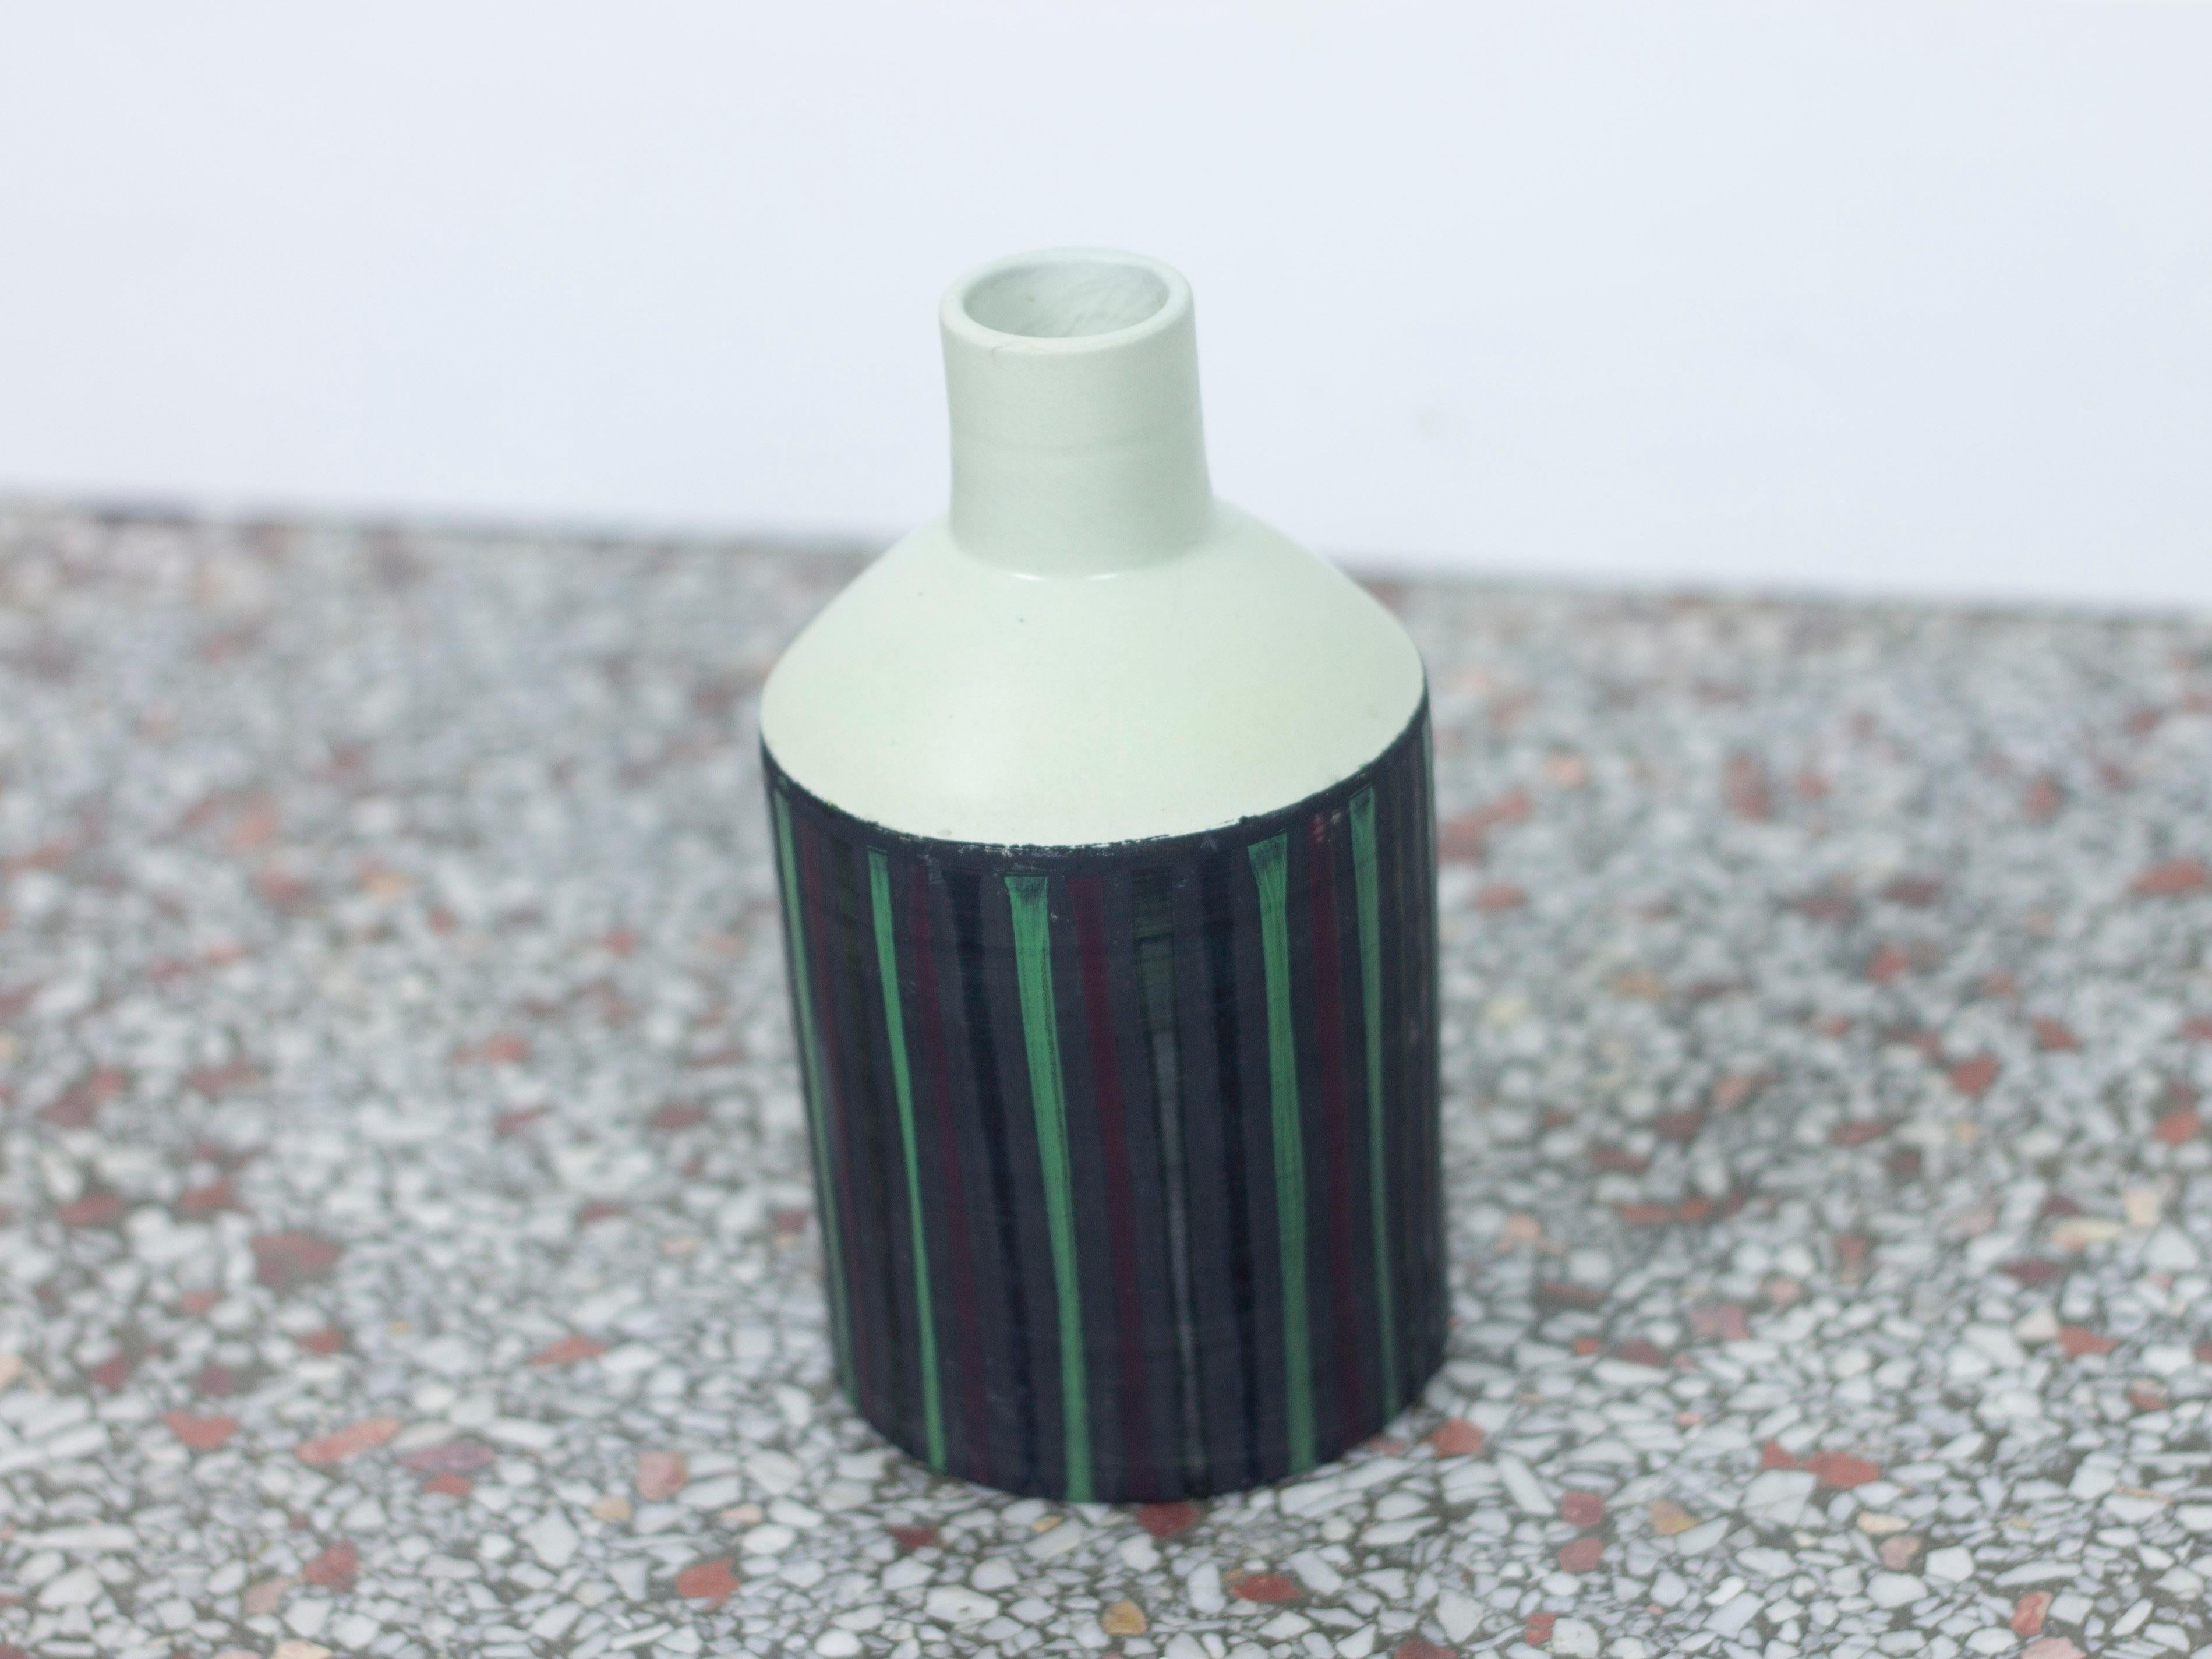 Small Ceramic Vase by Ettore Sottsass for Bitossi, 1959 For Sale 7